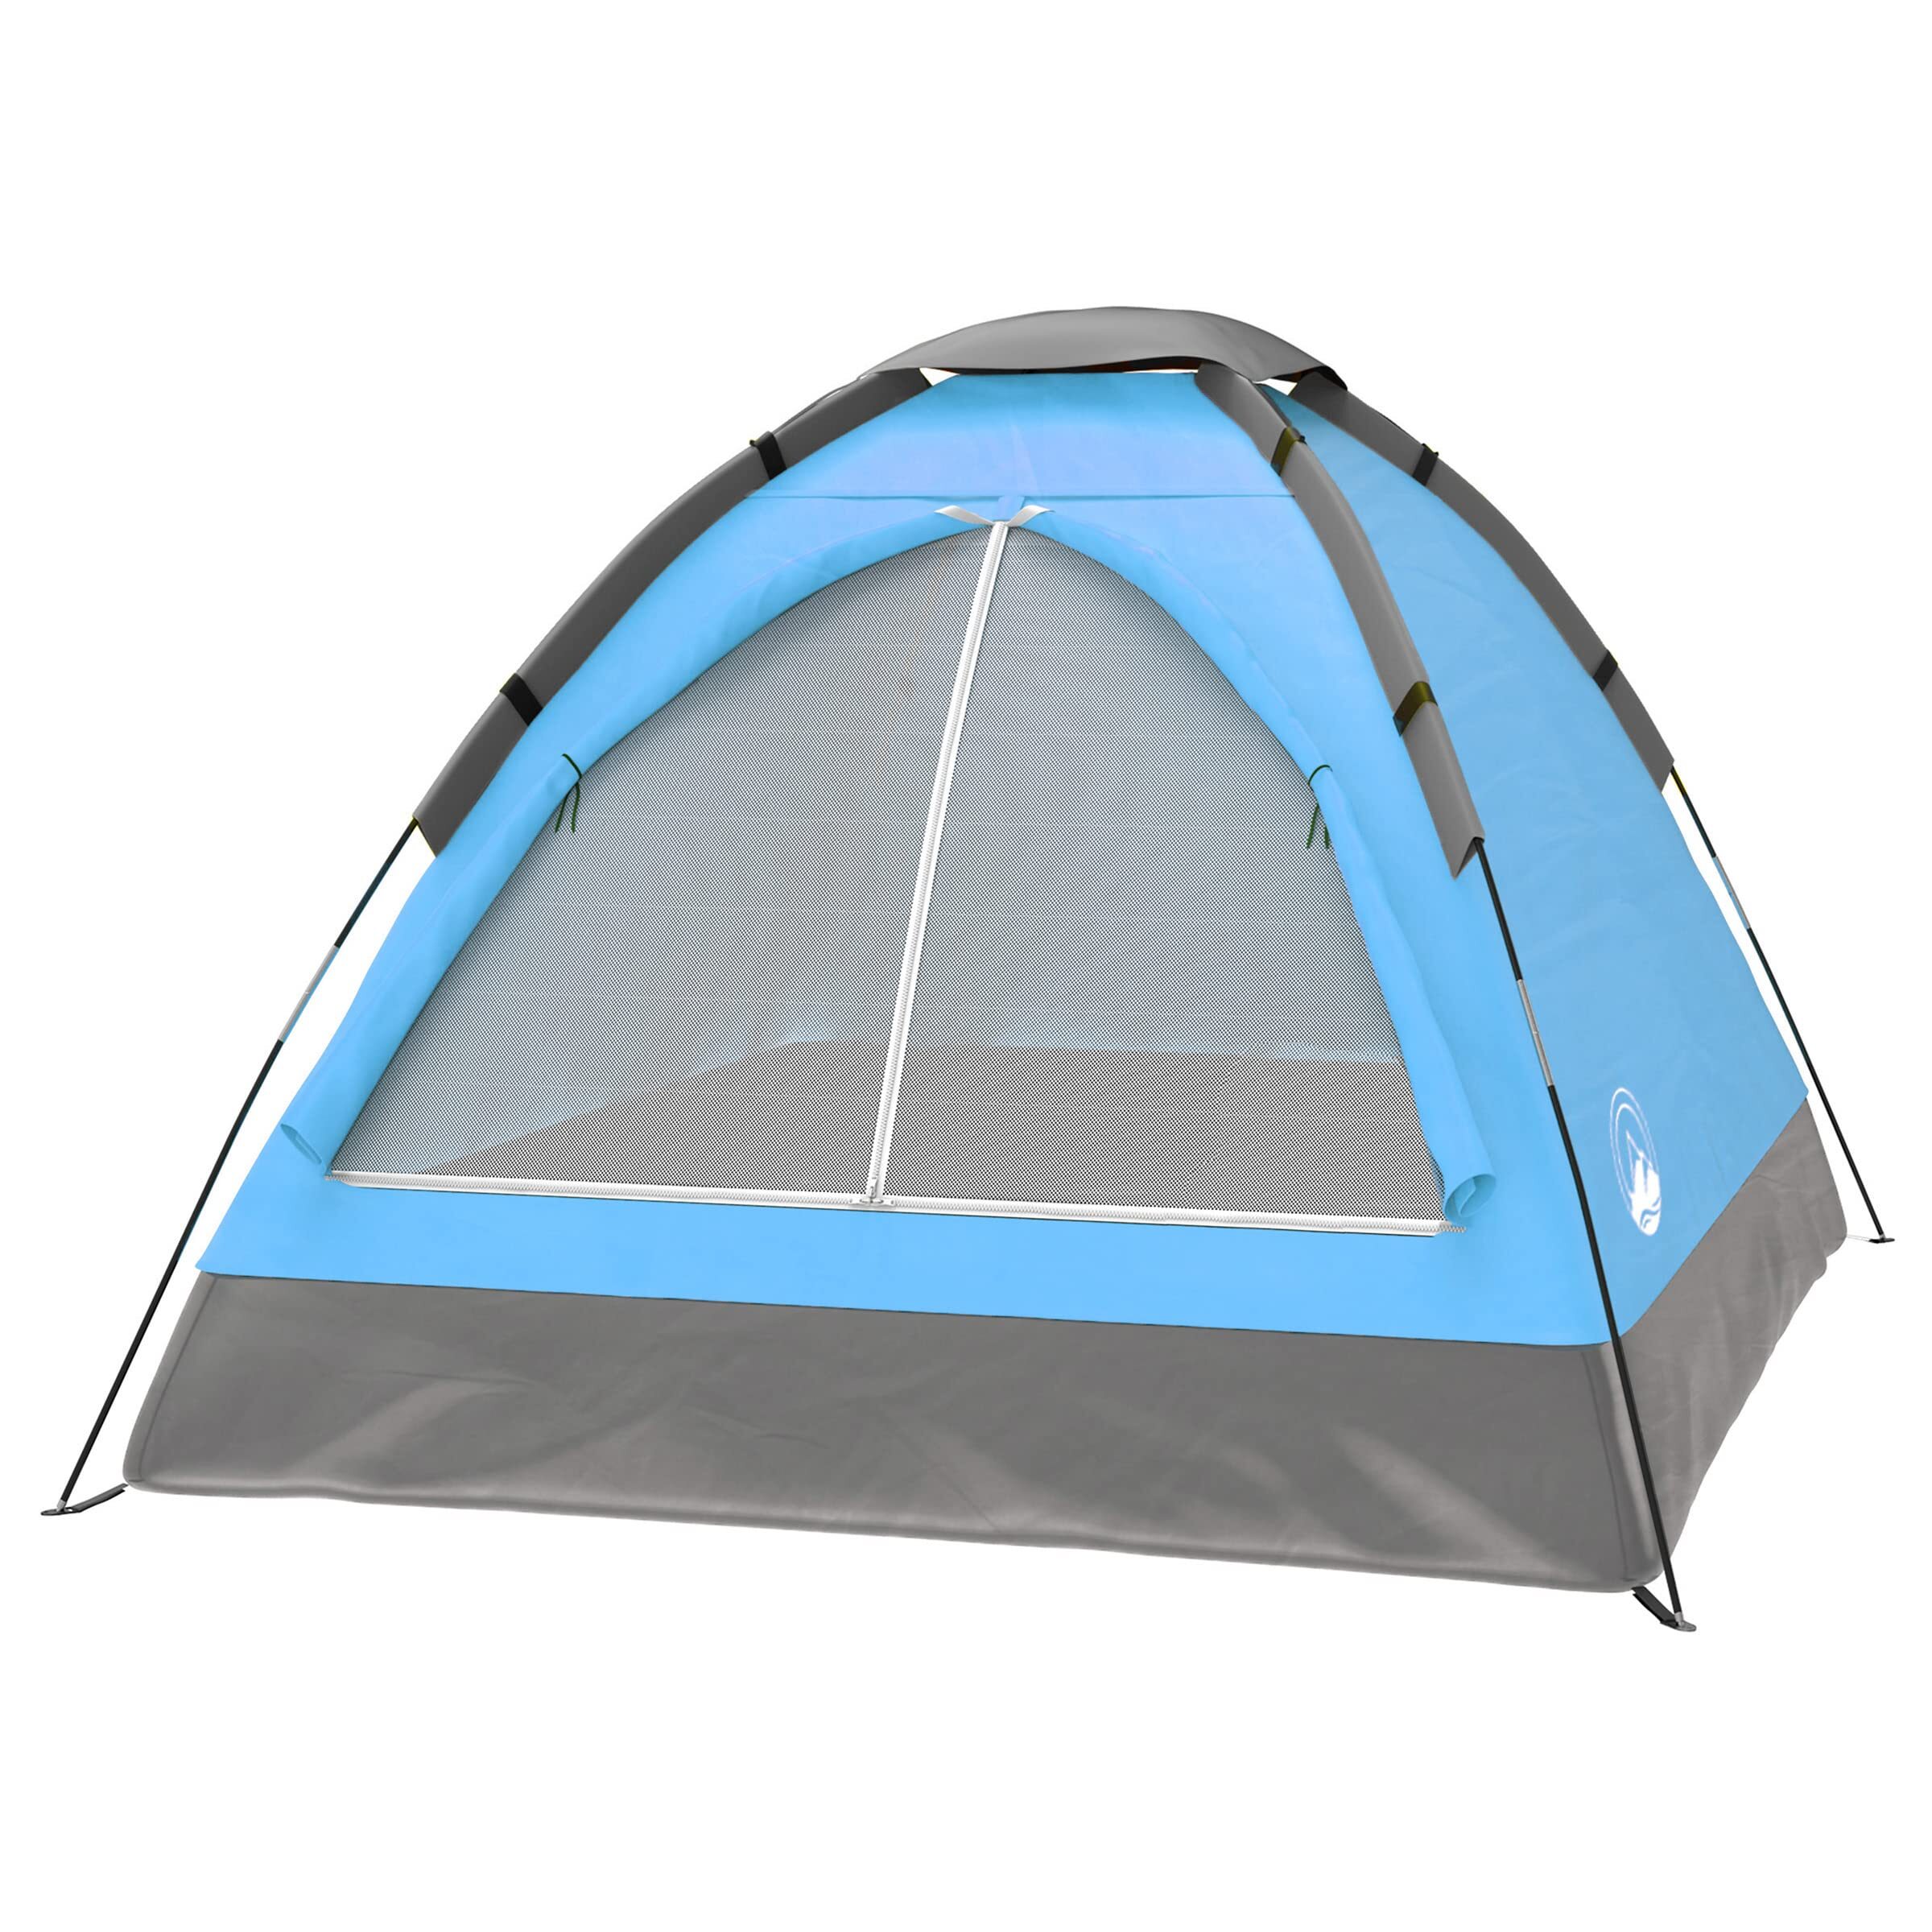 2-Person Camping Tent Includes Rain Fly and Carrying Bag